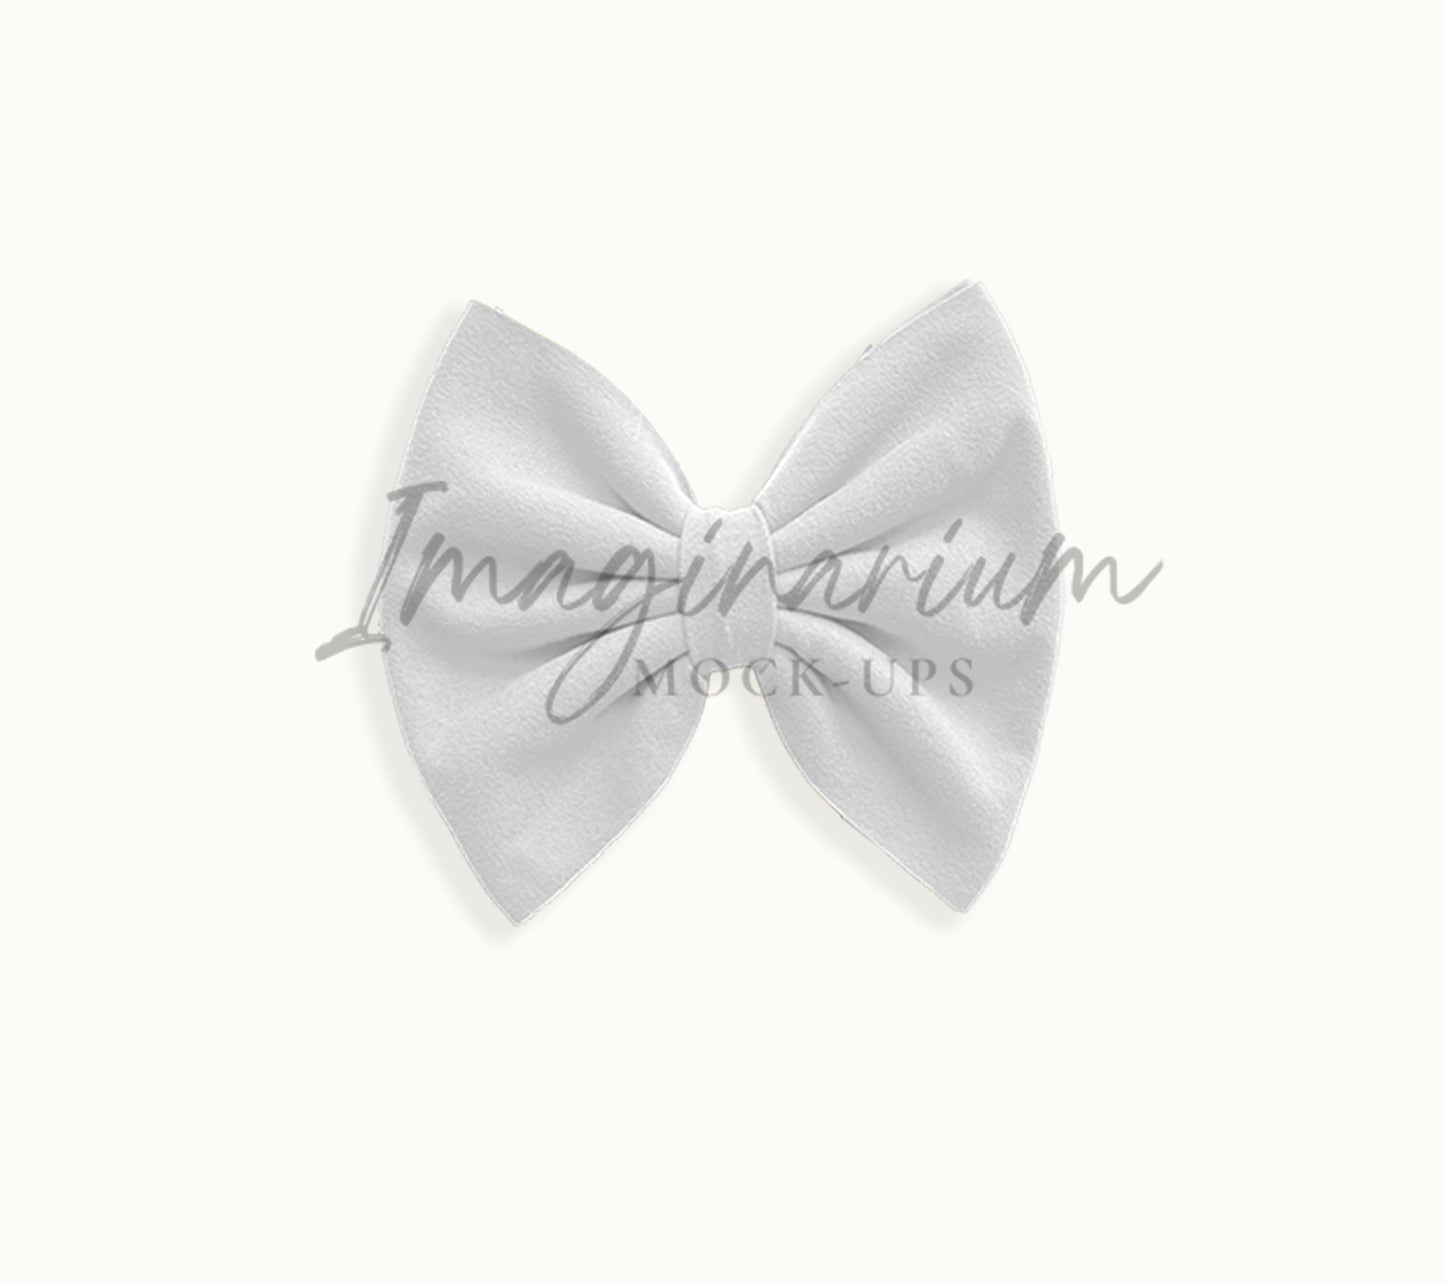 5 Inch Bow Mock Up, Customizable Realistic Mockup for Procreate and Photoshop